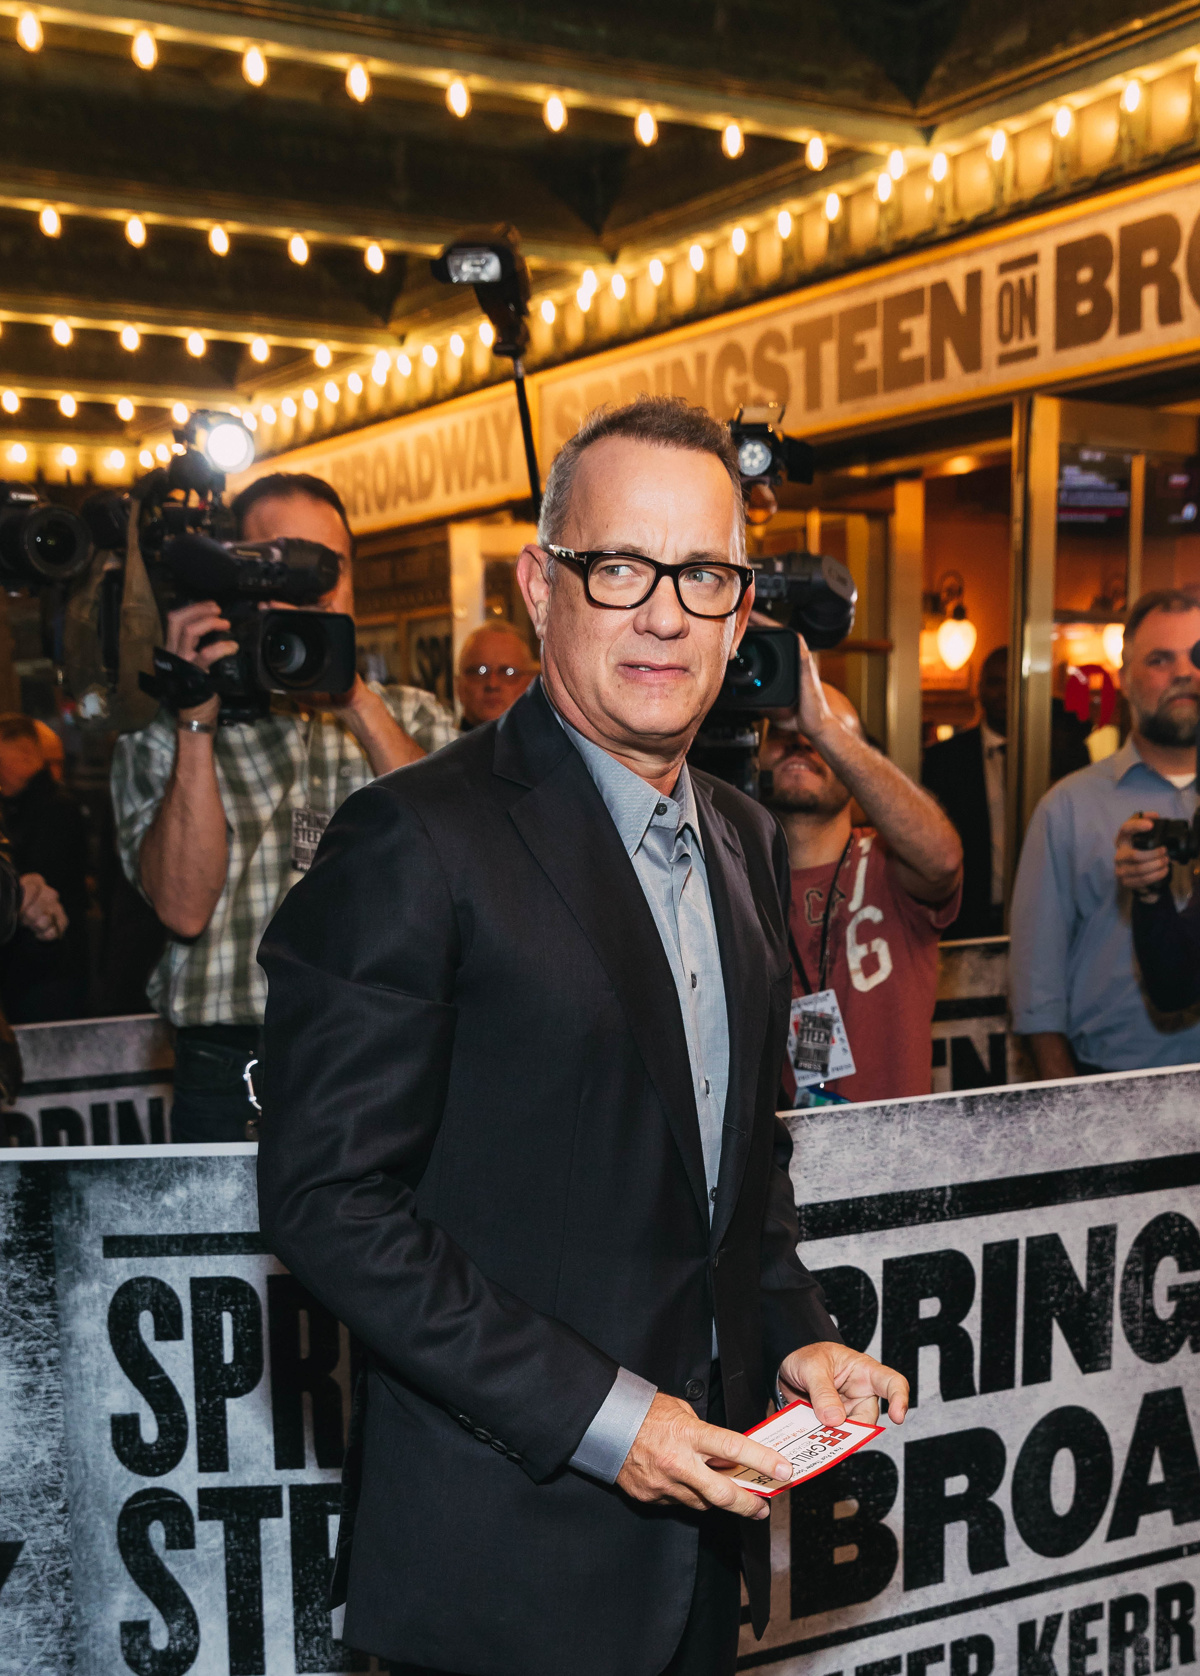 Glory Days! See Stars Step Out for Opening Night of Springsteen on Broadway | Broadway.com1200 x 1676